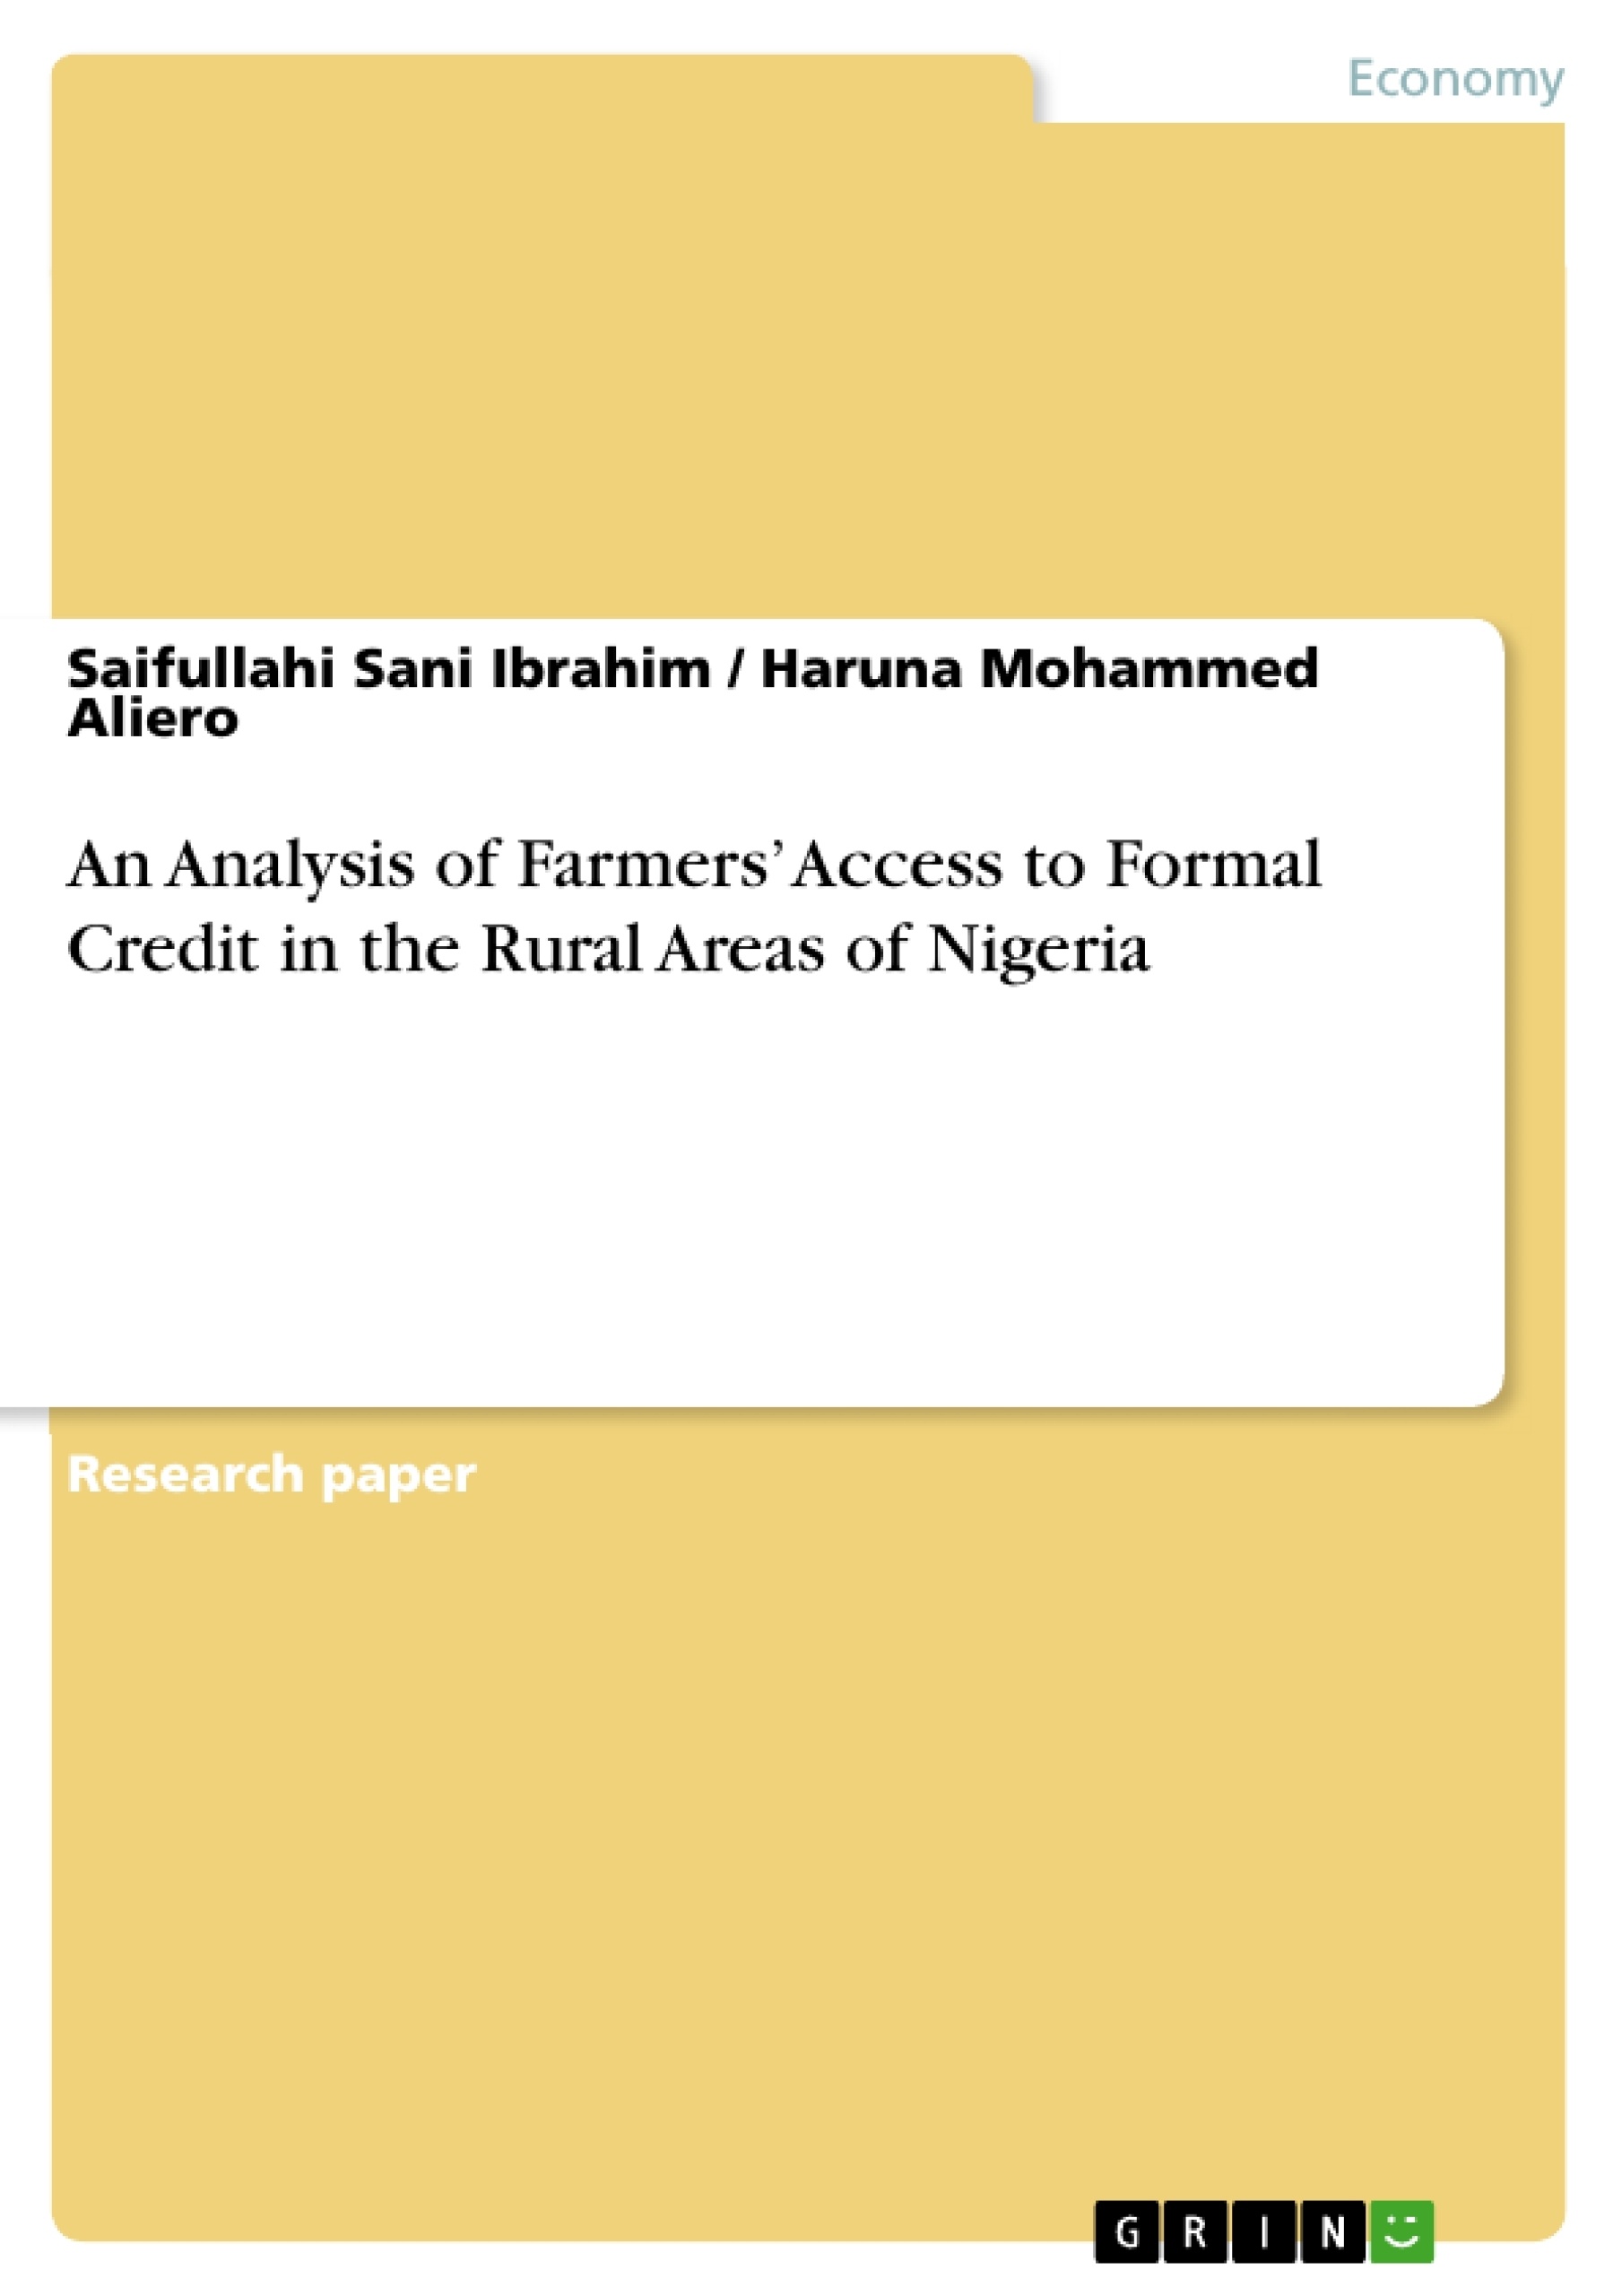 Titre: An Analysis of Farmers’ Access to Formal Credit in the Rural Areas of Nigeria